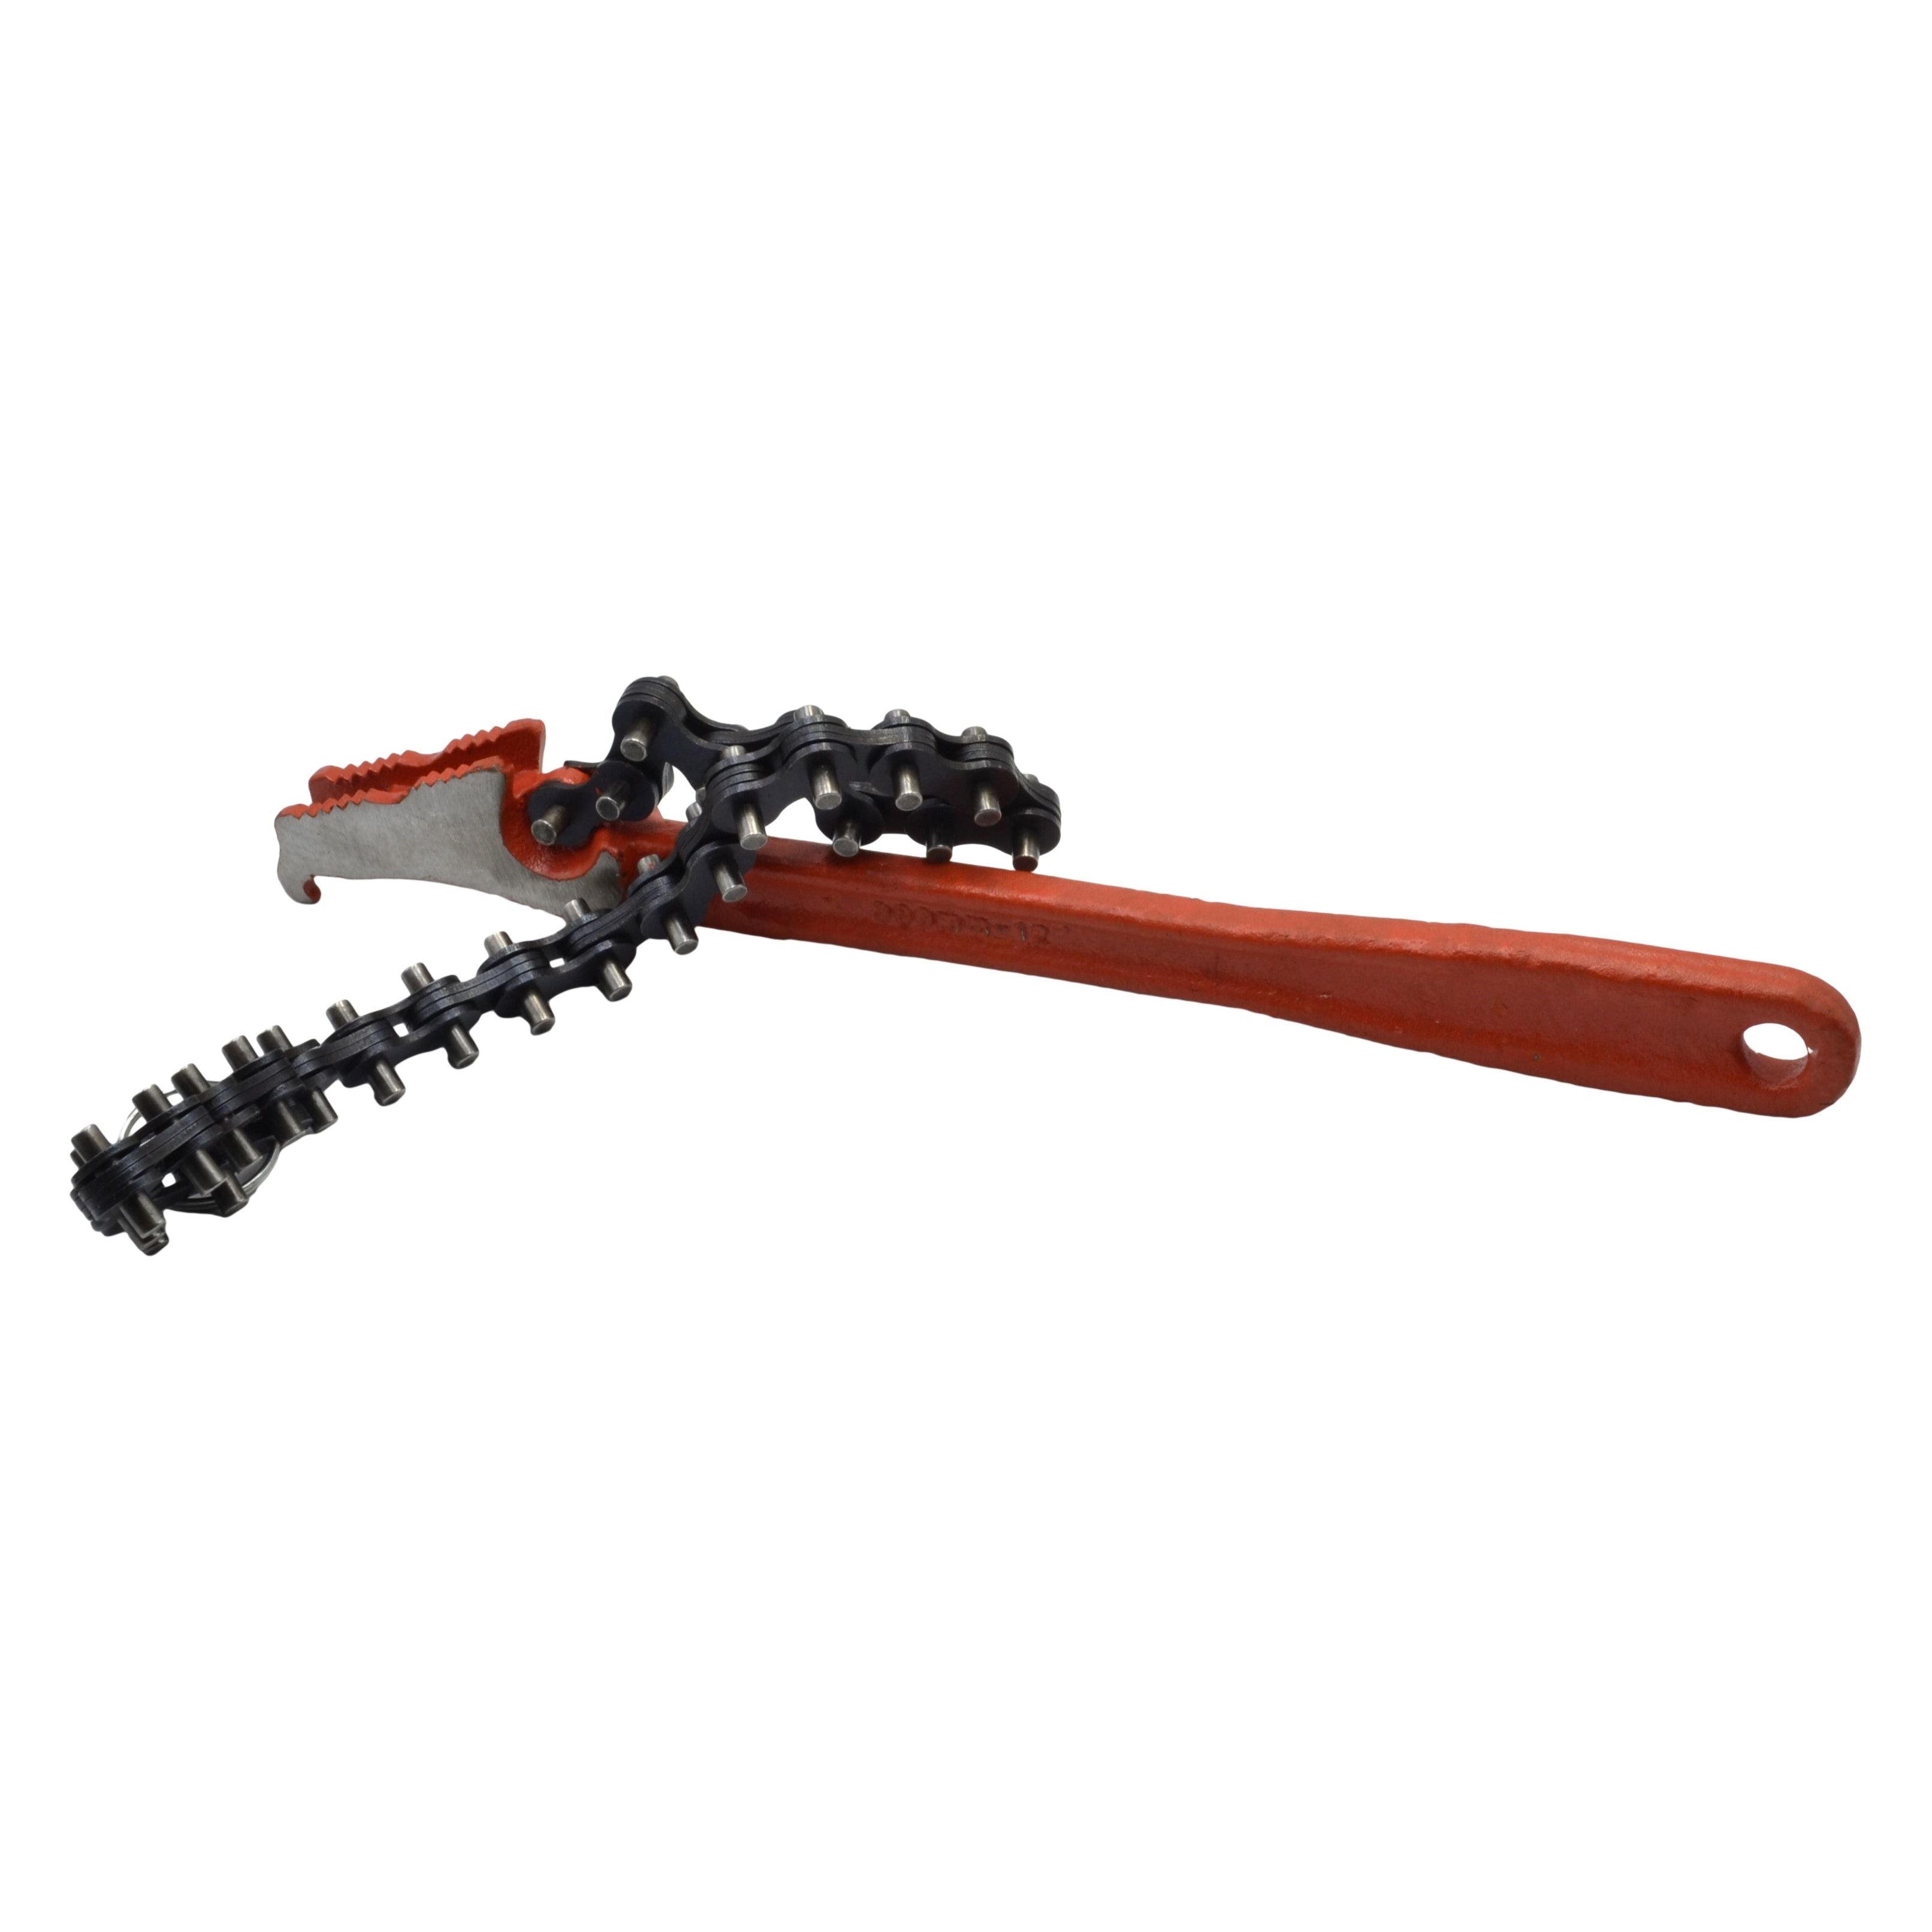 Haron HCW4 100mm Chain Wrench